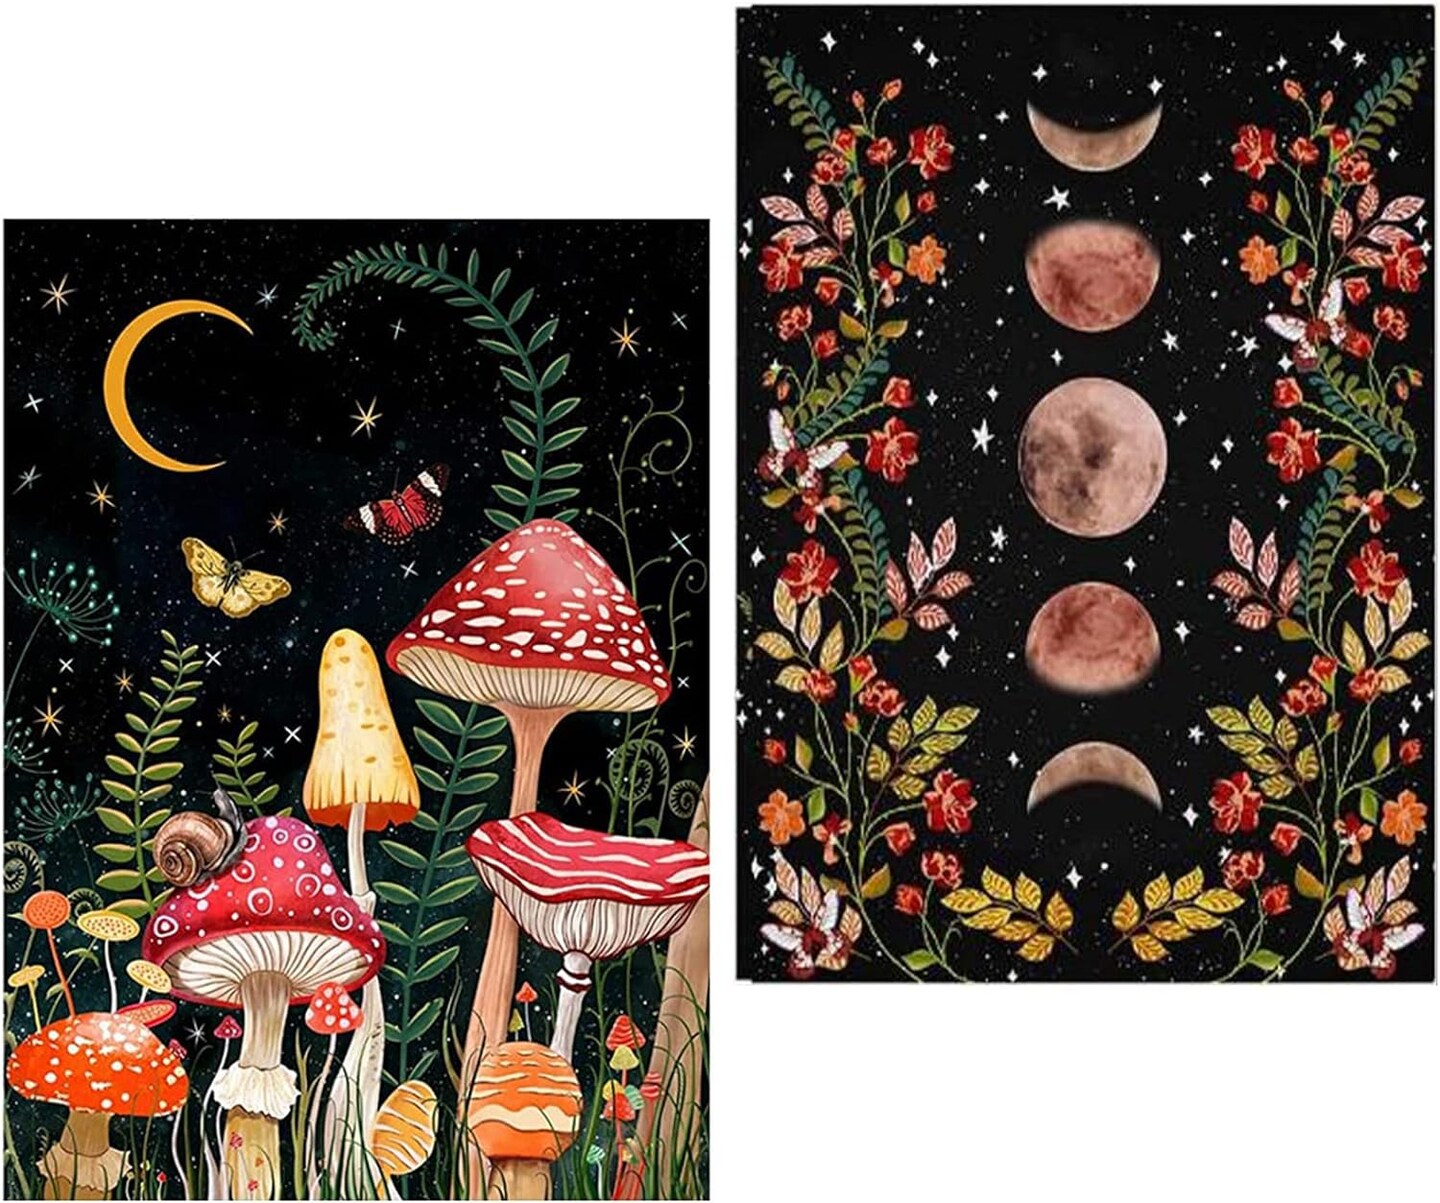 2 Pack Diamond Painting Kits for Adults,5D DIY Mushroom Forest Full Drill Round Art Gems with Moon Diamond Art Perfect for Home Wall Decor Diamond Dotz Inch12x16